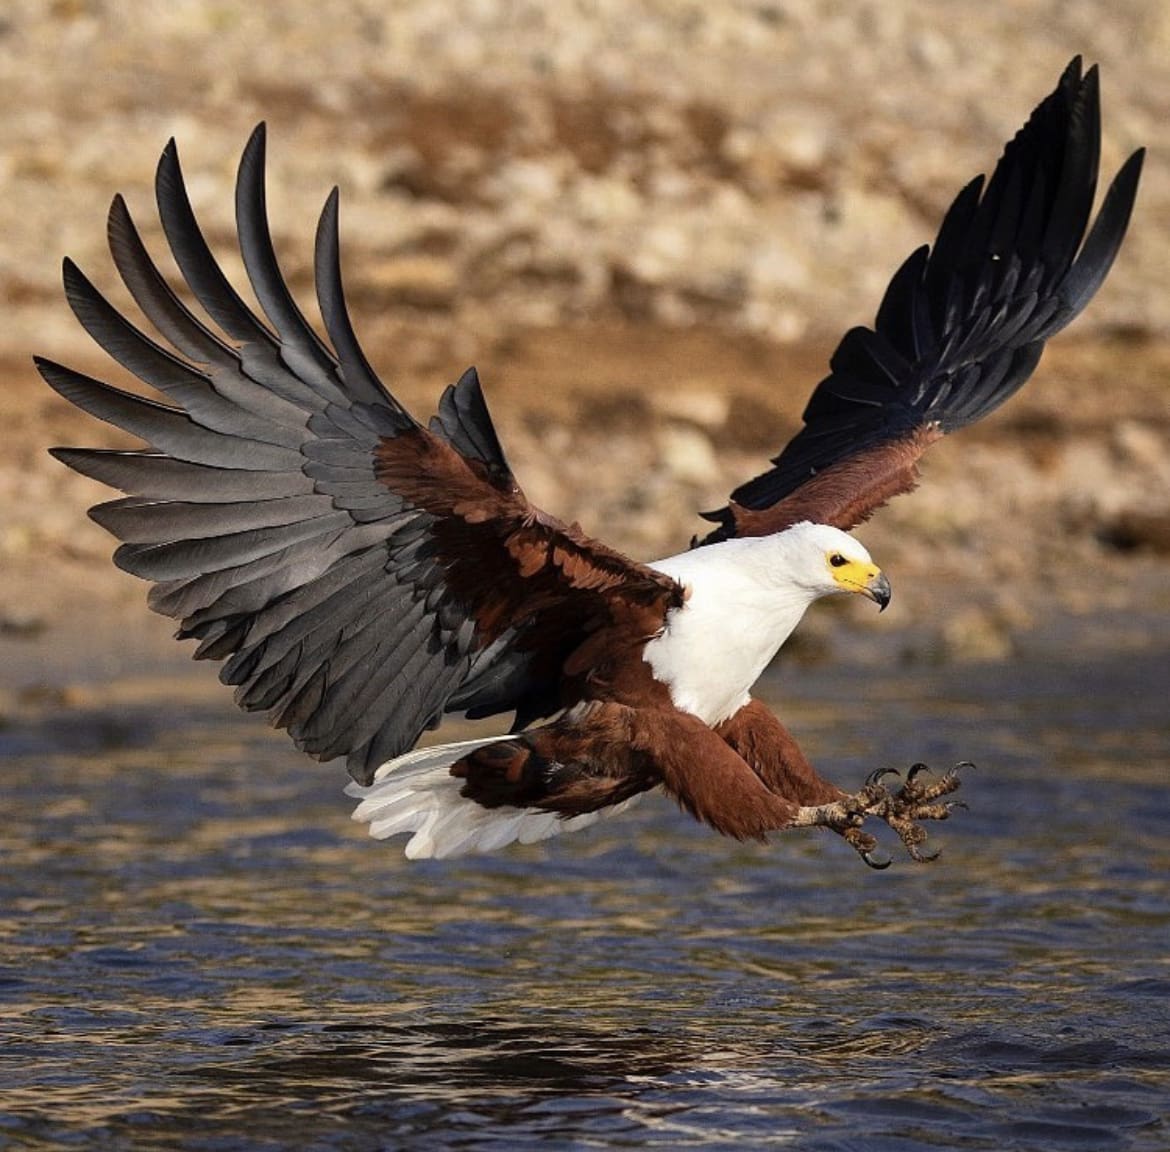 African fish eagle - The World's Largest Eagles